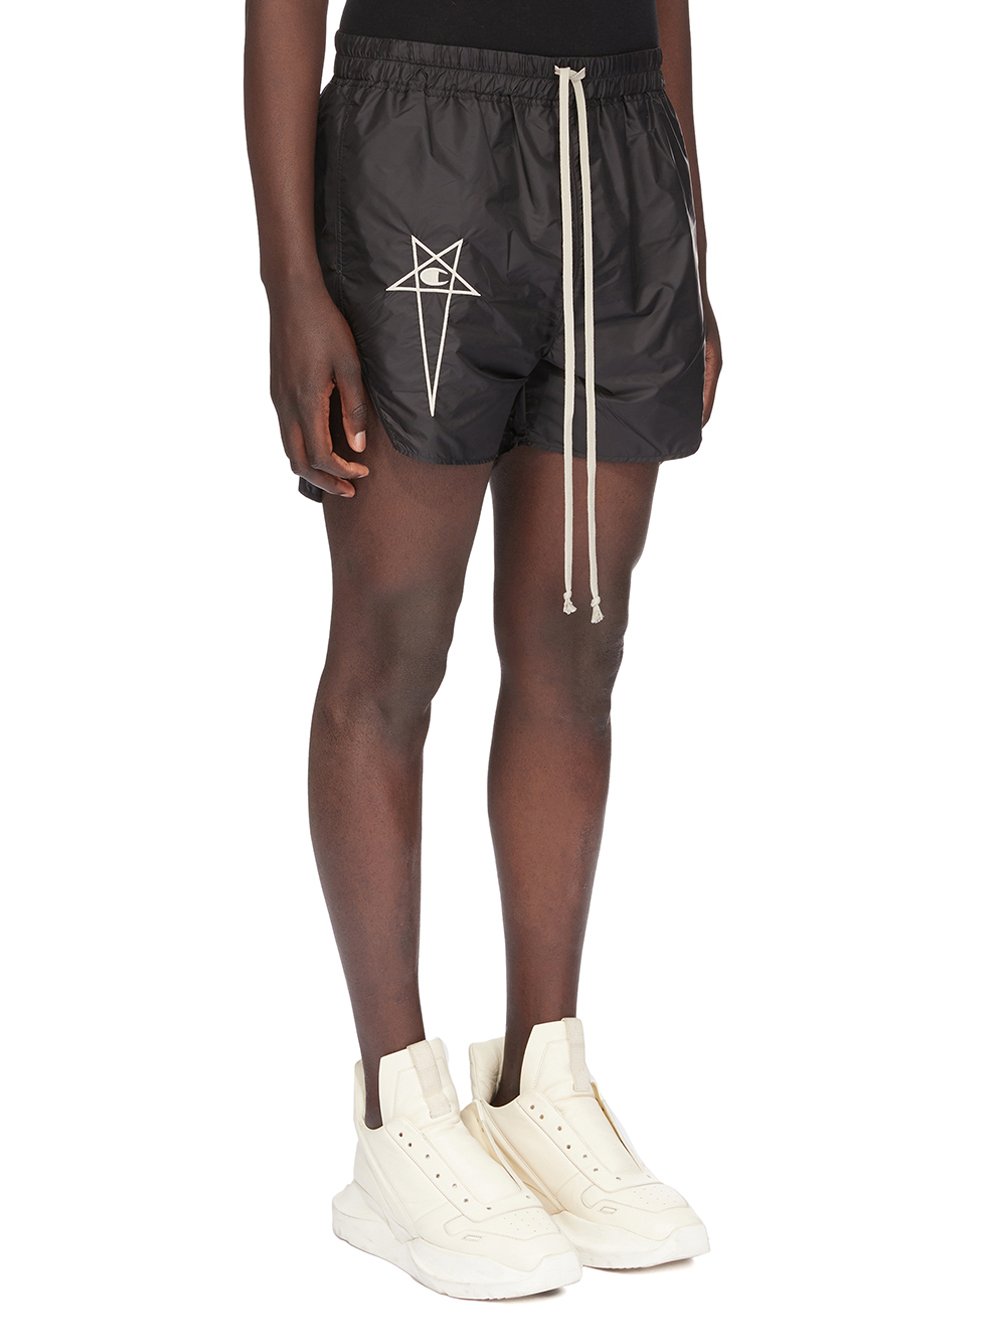 CHAMPION X RICK OWENS DOLPHIN BOXERS IN BLACK RECYCLED NYLON